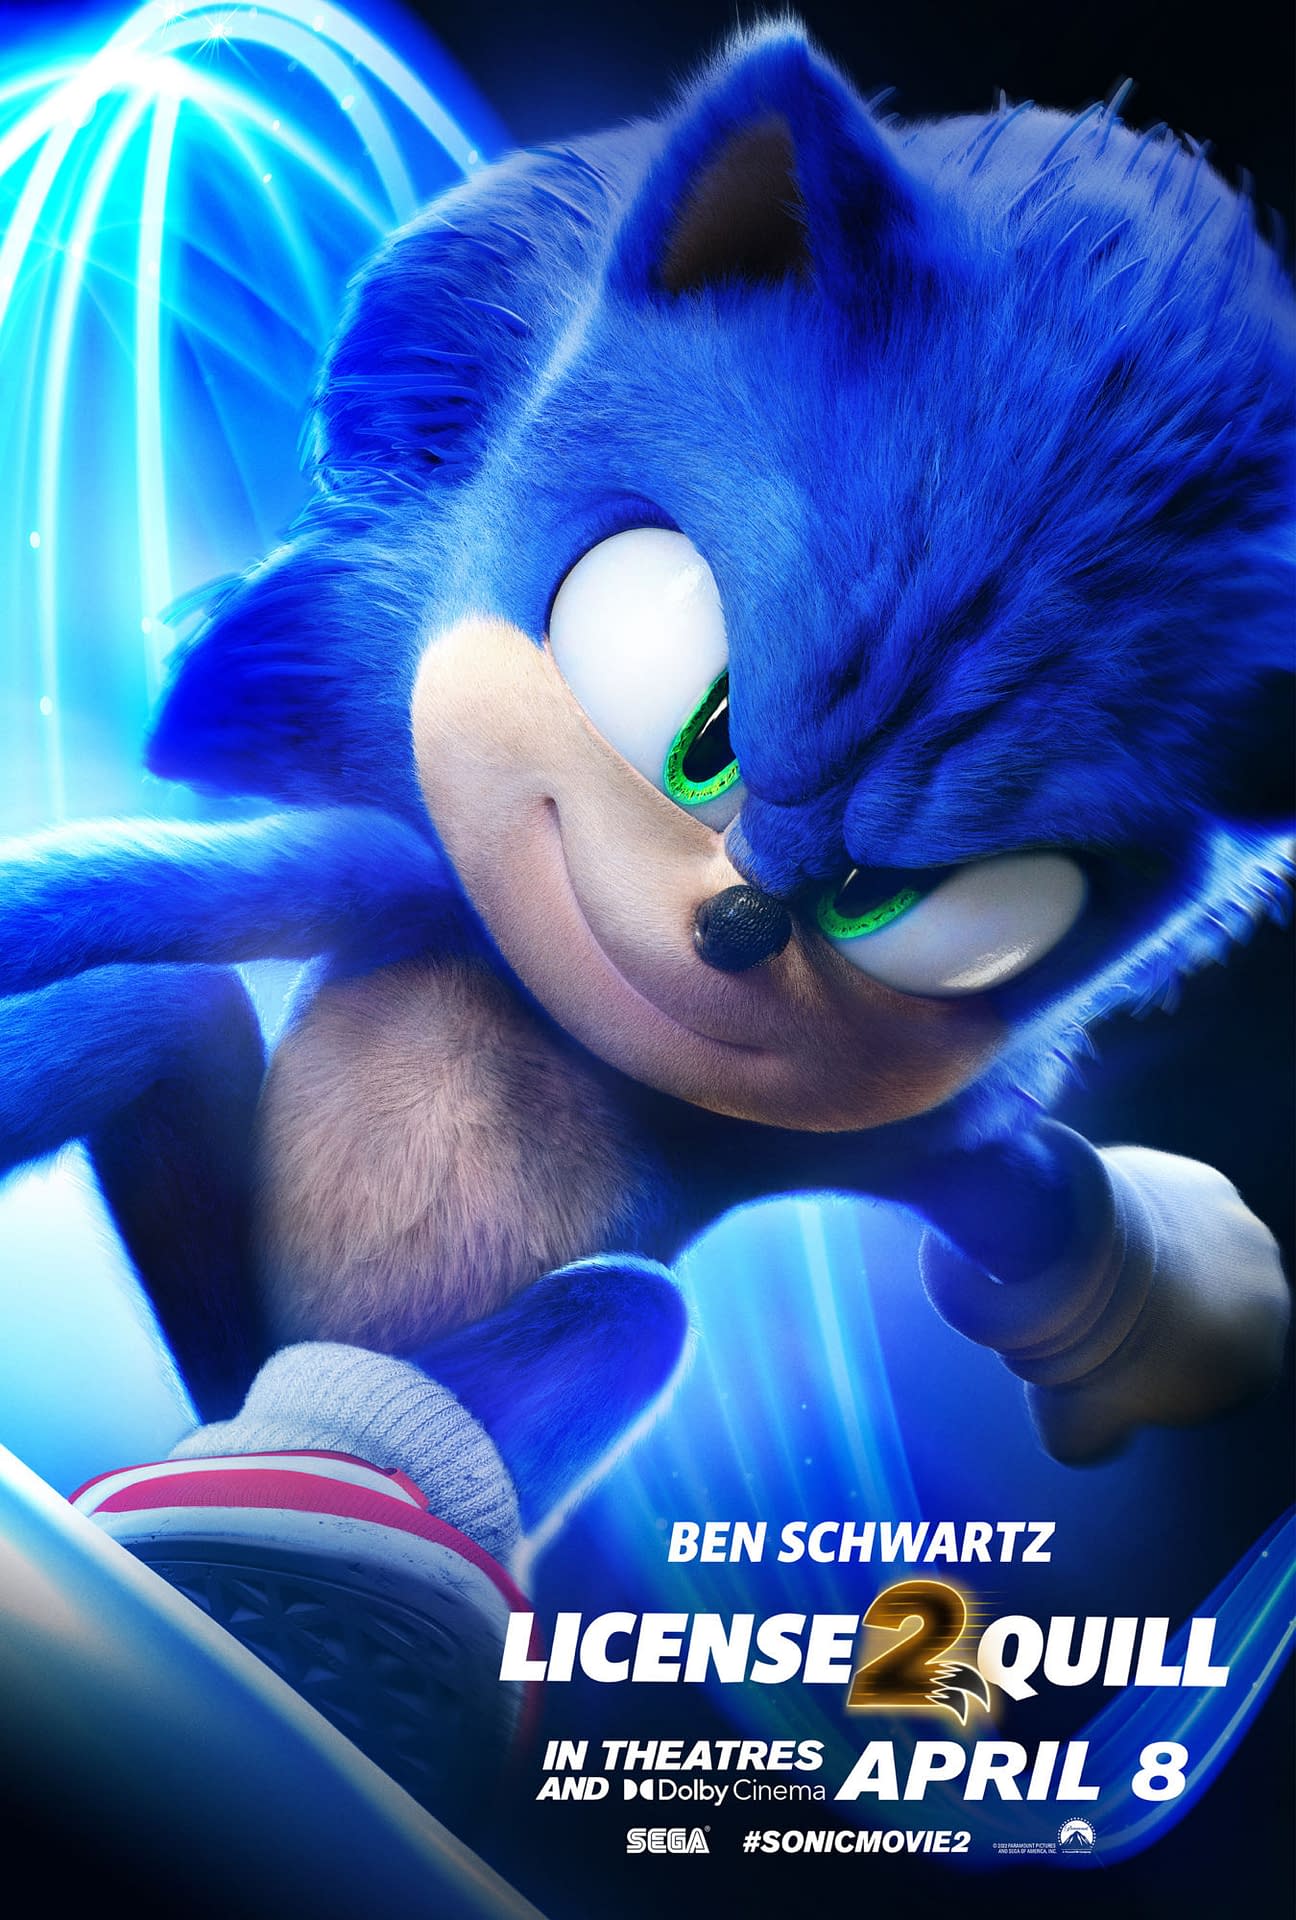 Character Posters Released for Sonic the Hedgehog 2